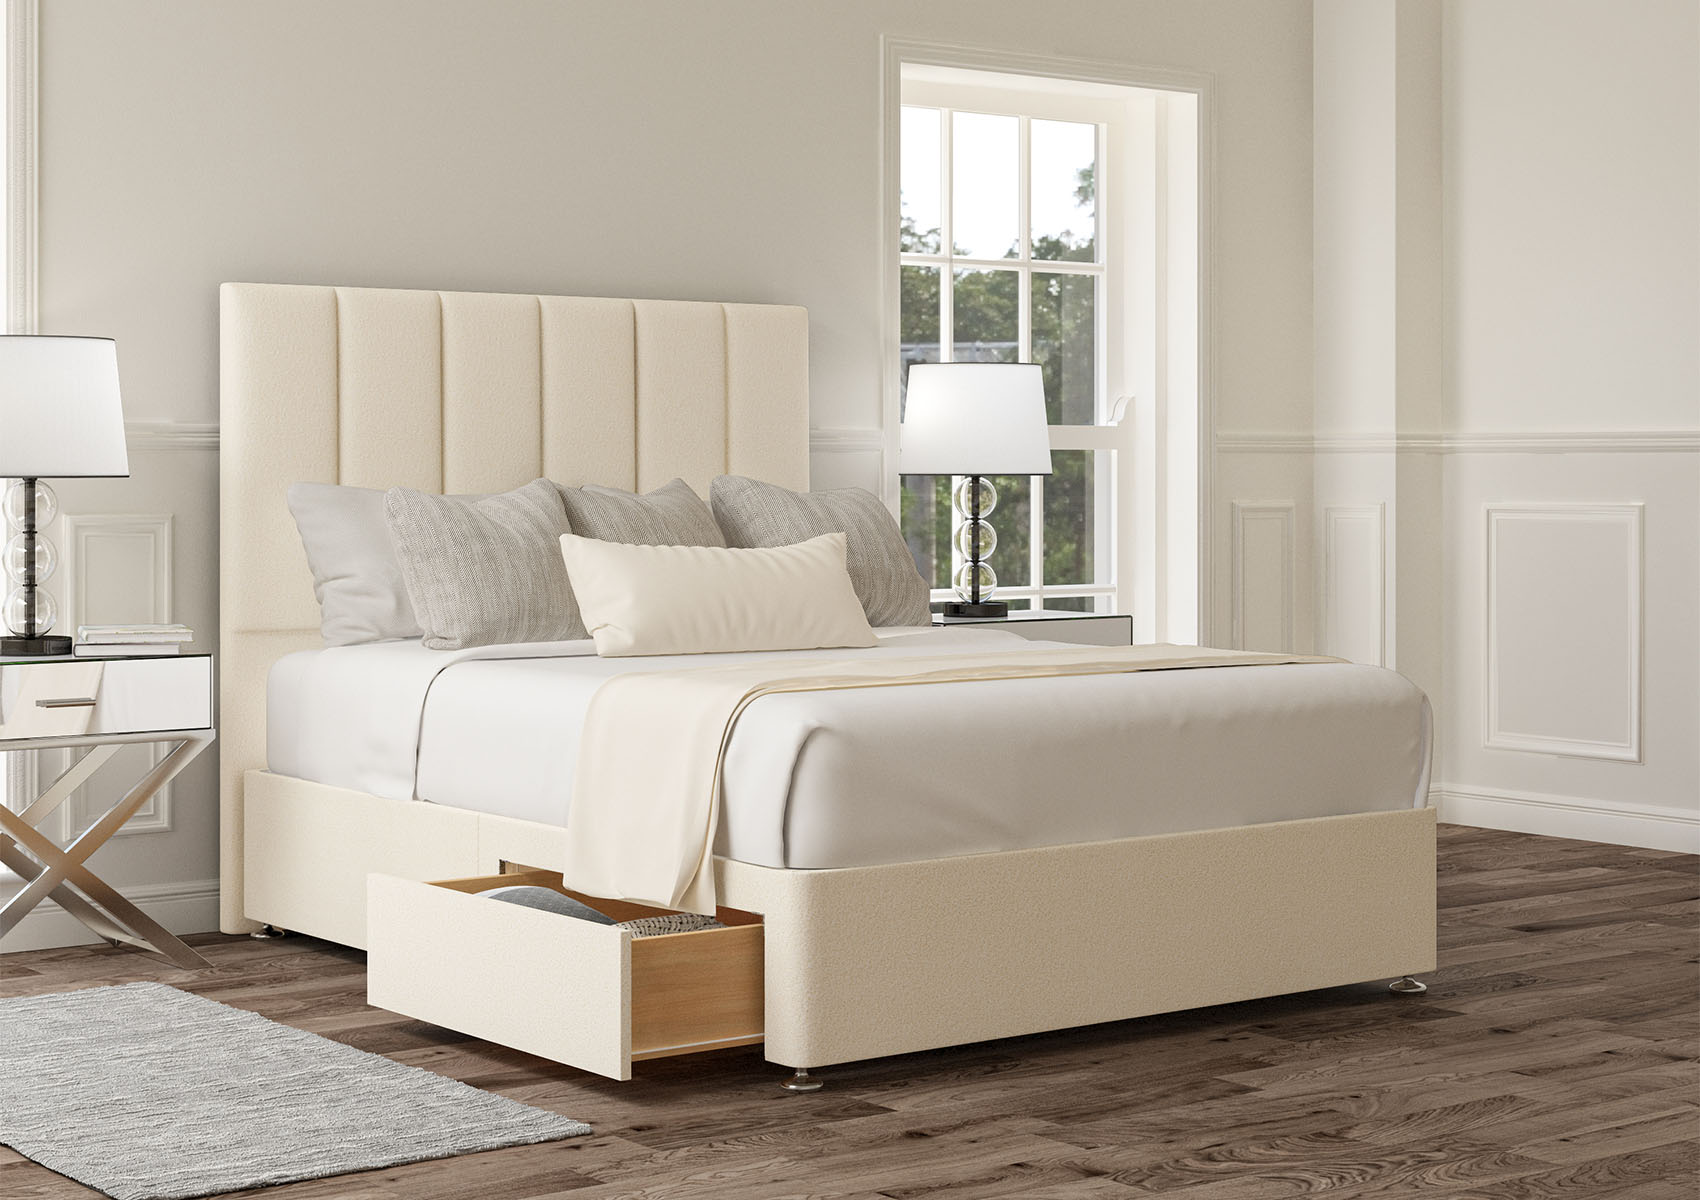 View Empire Teddy Cream Upholstered Compact Double Divan Bed Time4Sleep information